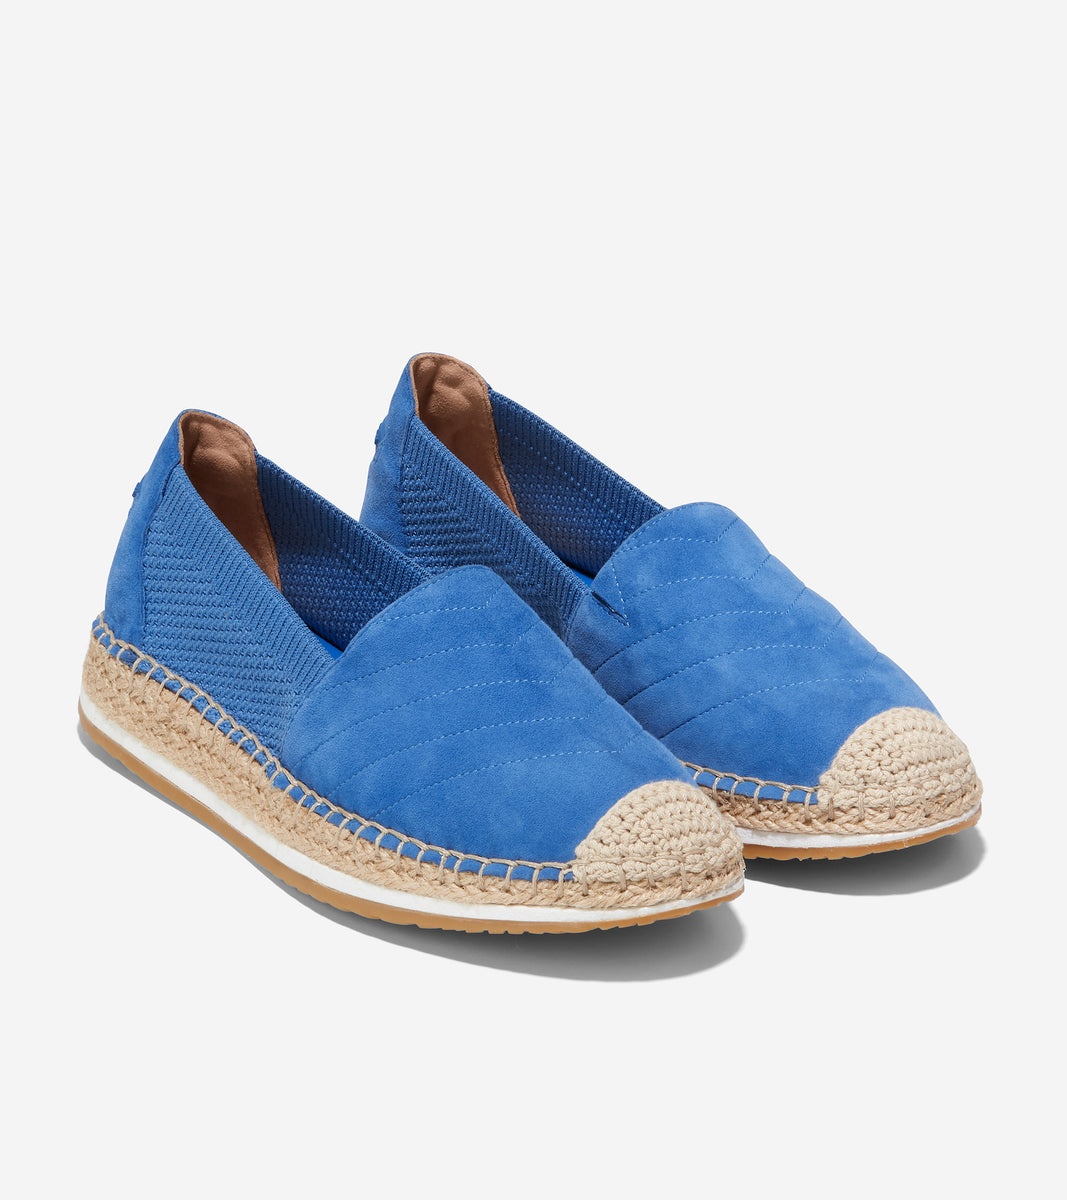 w25218-Cloudfeel Espadrille Loafer-Bright Cobalt